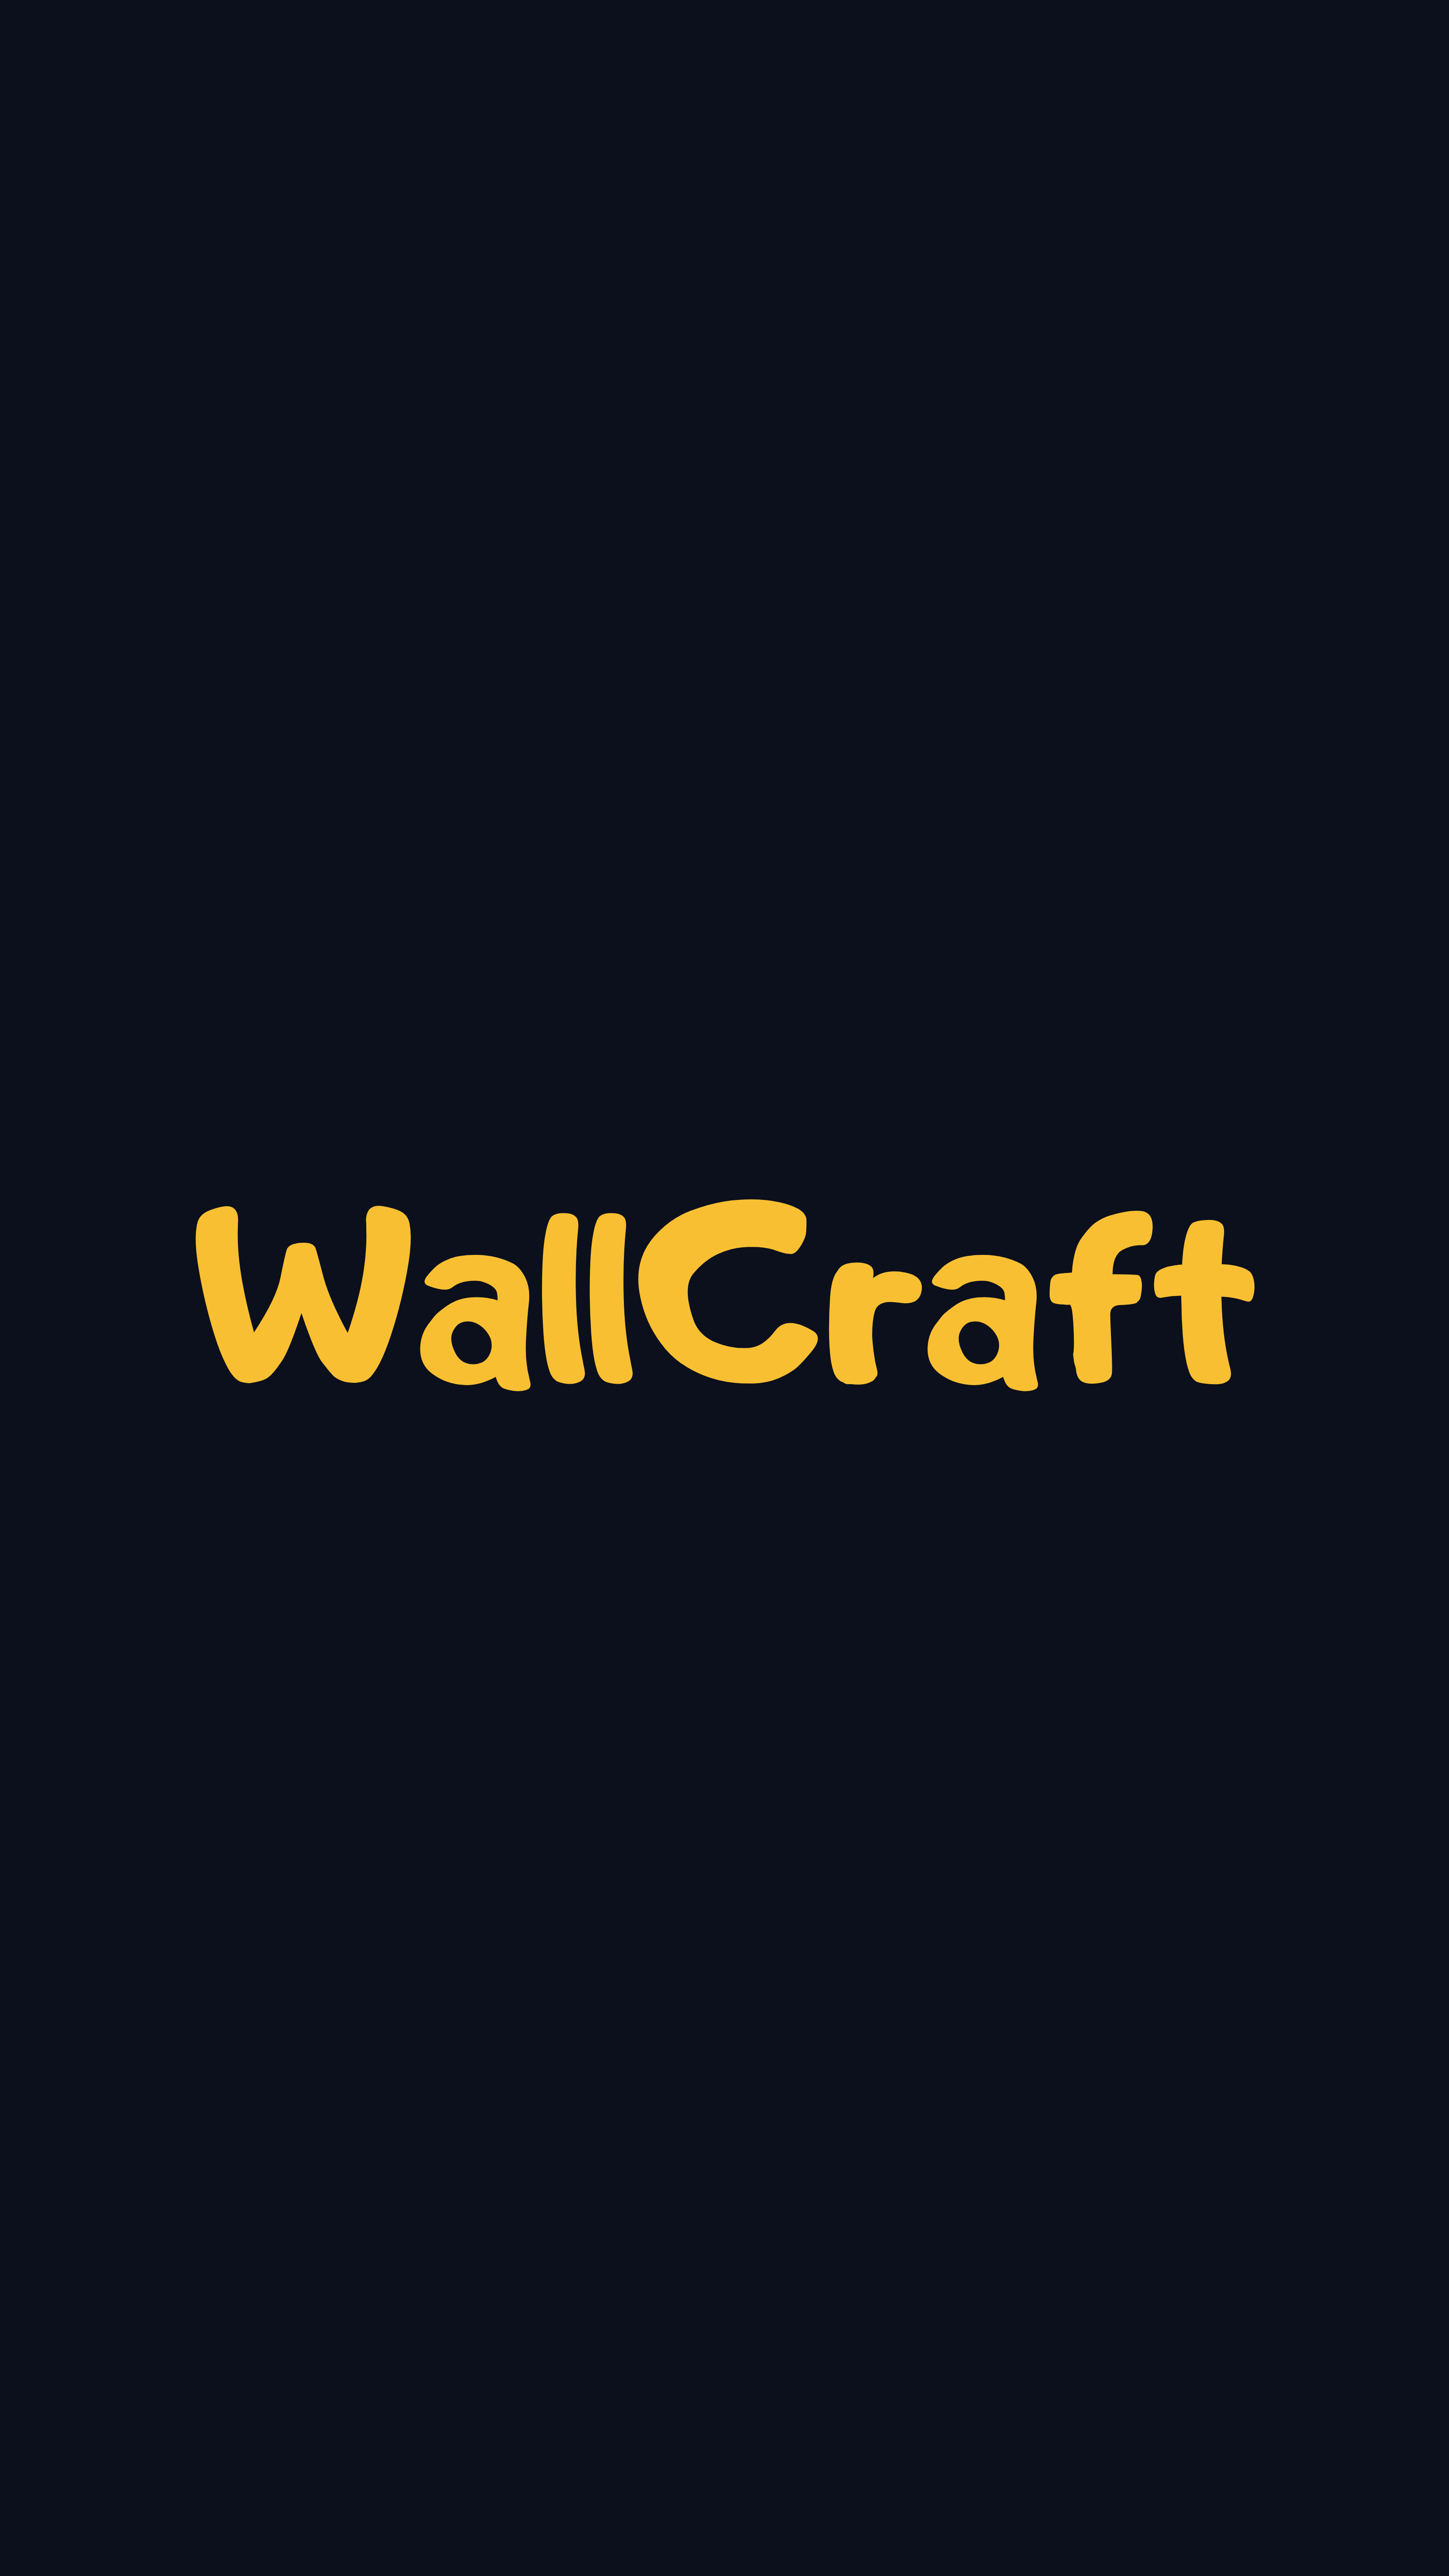 words, minimalism, inscription, word, logo, logotype, wallcraft for android